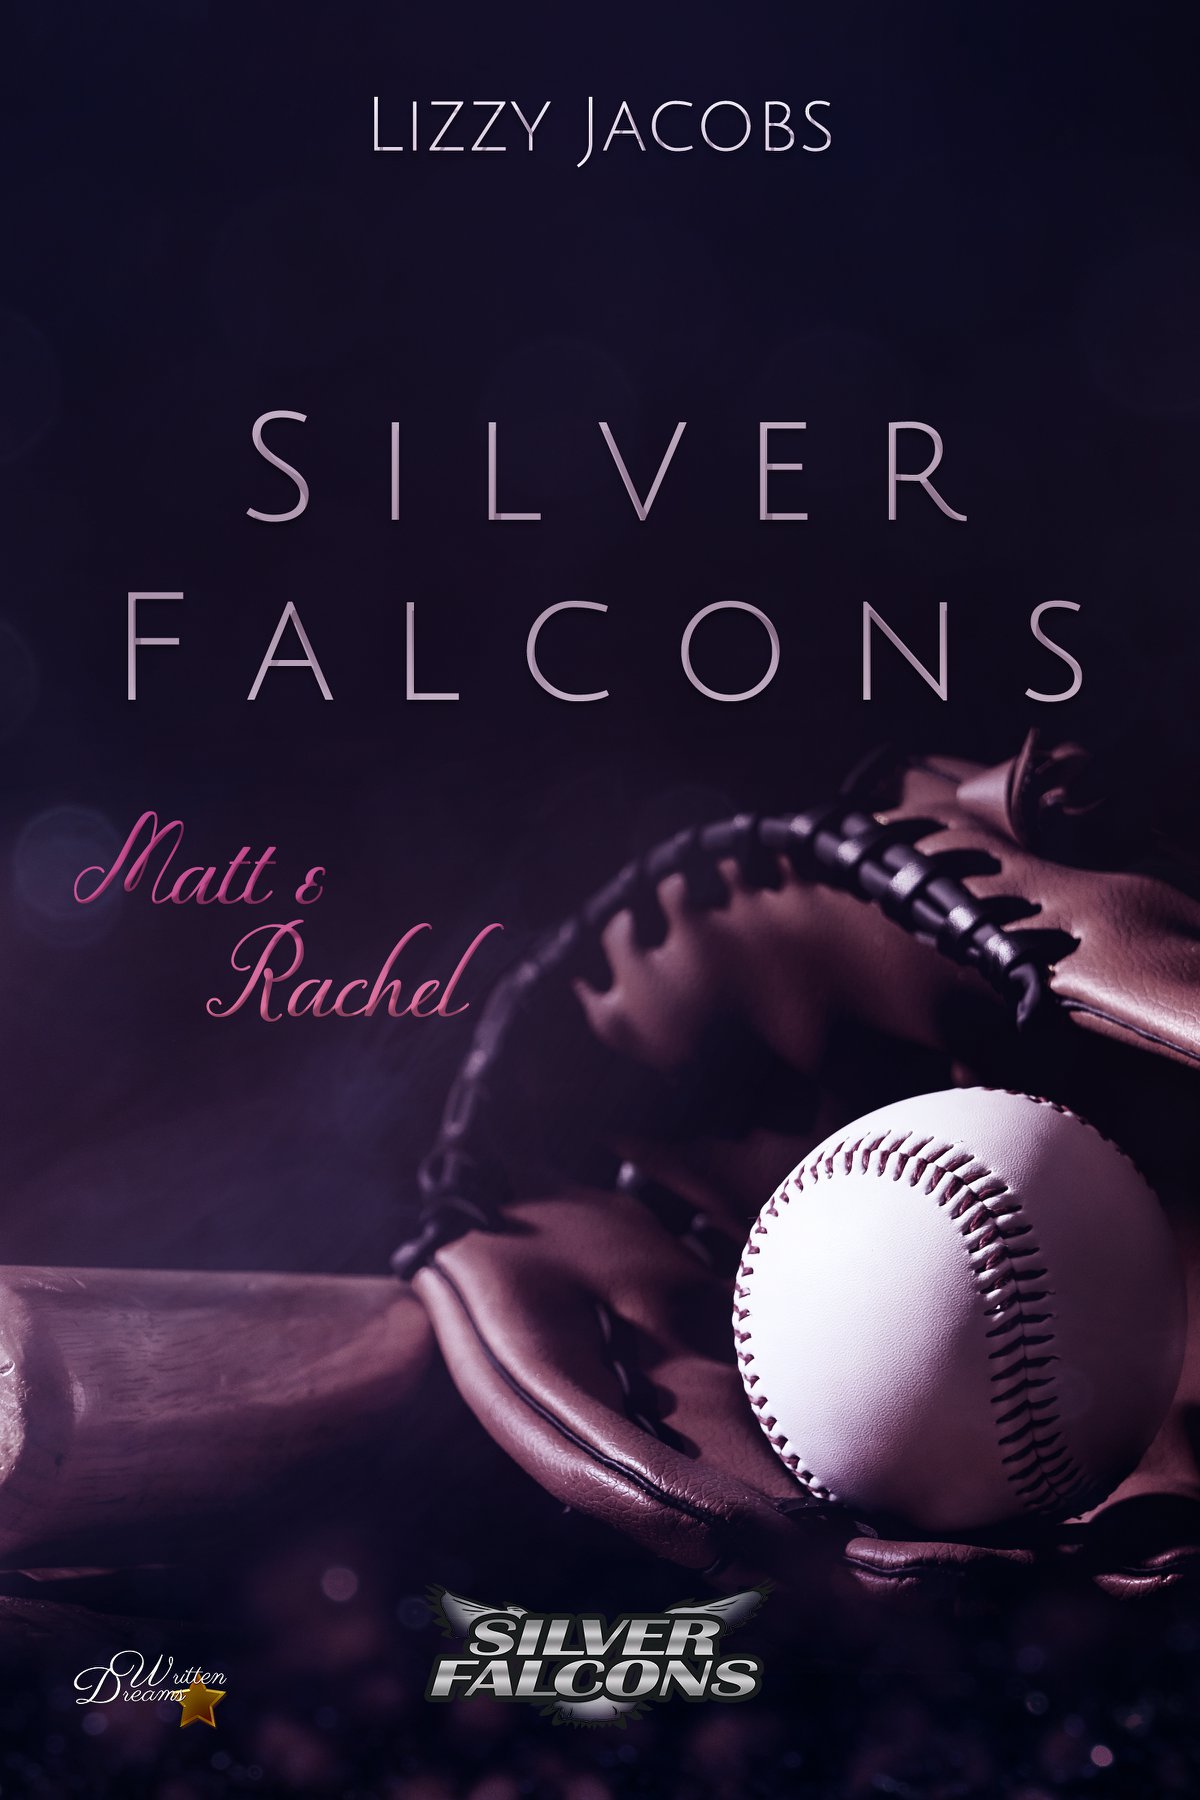 You are currently viewing Silver Falcons – Lizzy Jacobs